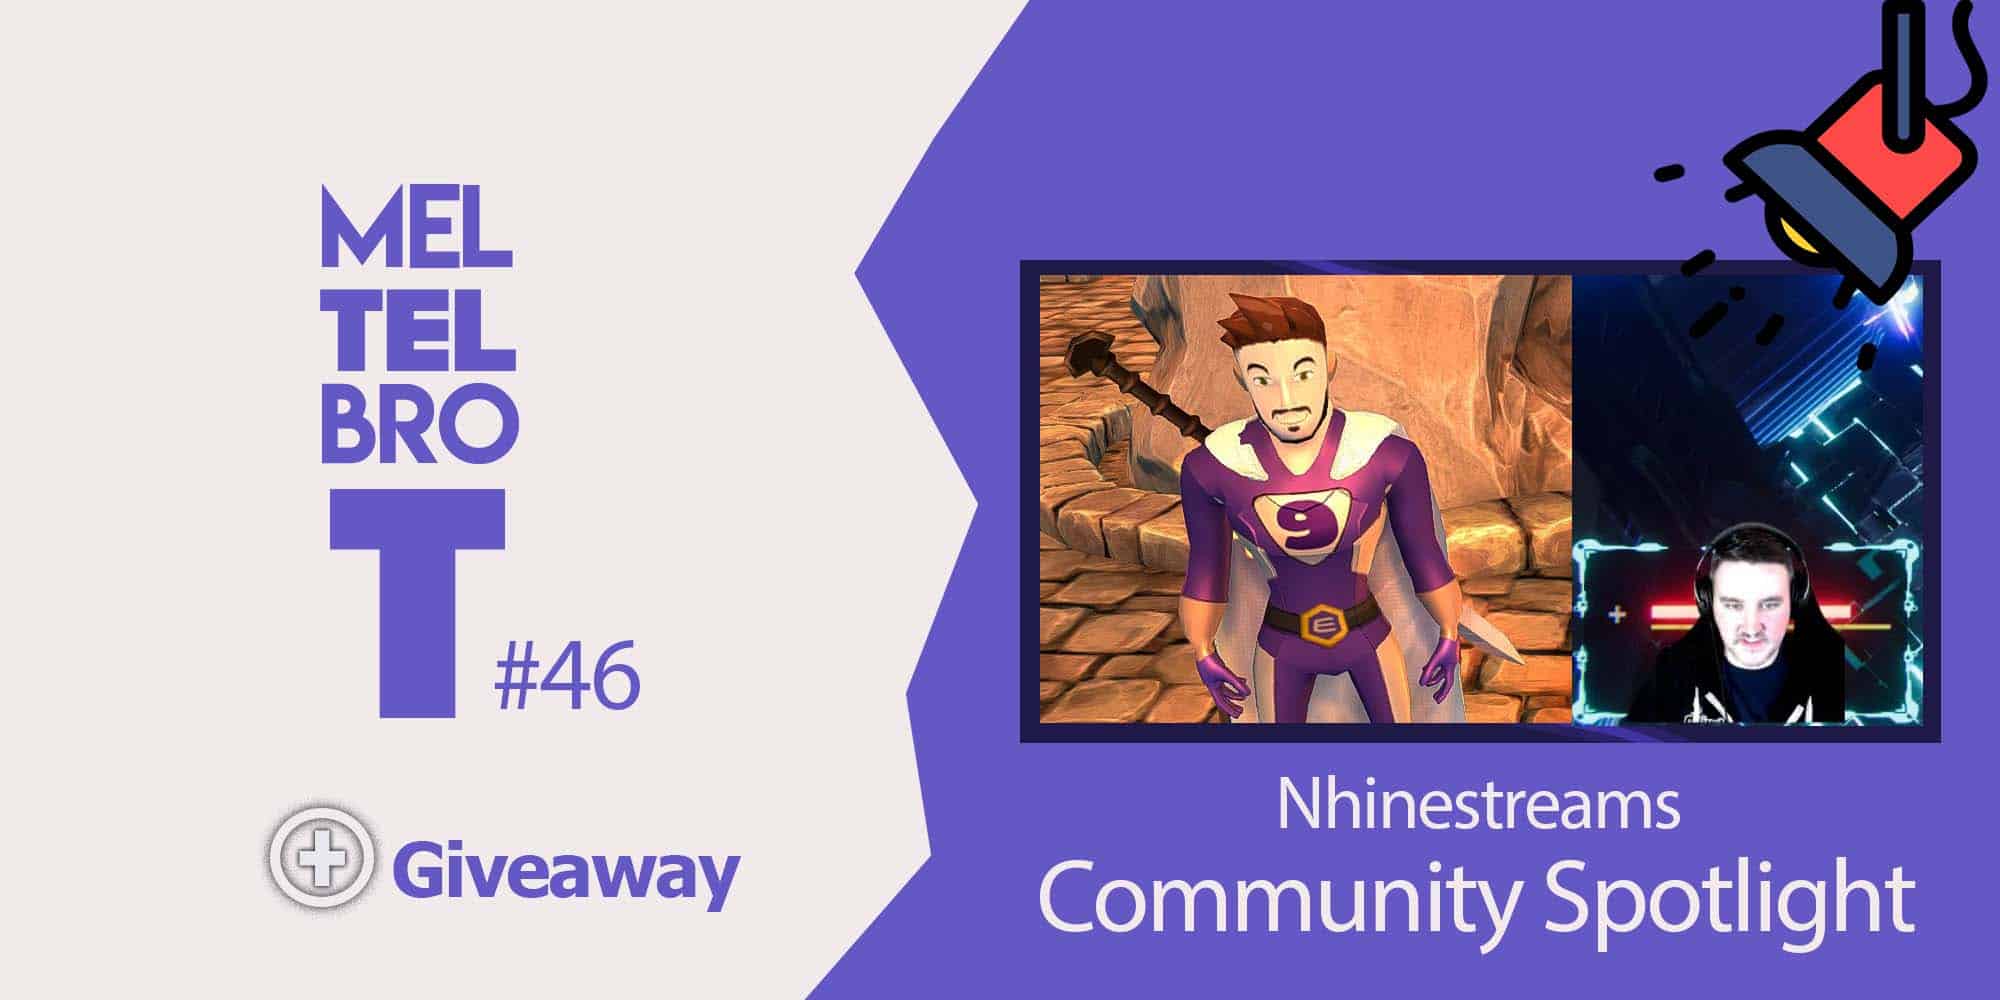 Meltelbrot nhinestreams In these Meltelbrot interviews, I chat with indie devs and creative community members of Enjin who put their own developing skills to task. Today I’m chatting with Nhinestreams, who is a streamer and uber active community member within the Enjin ecosystem. Nhinestreams is well known for his gaming prowess and trivia skills, and runs a popular discord channel for those interested in Enjin and gaming in general. He has just introduced a new rewarding feature to his discord community that I think many will find interesting, so let’s find out more about Nhinestreams and where he’s taking his warriors in arms.